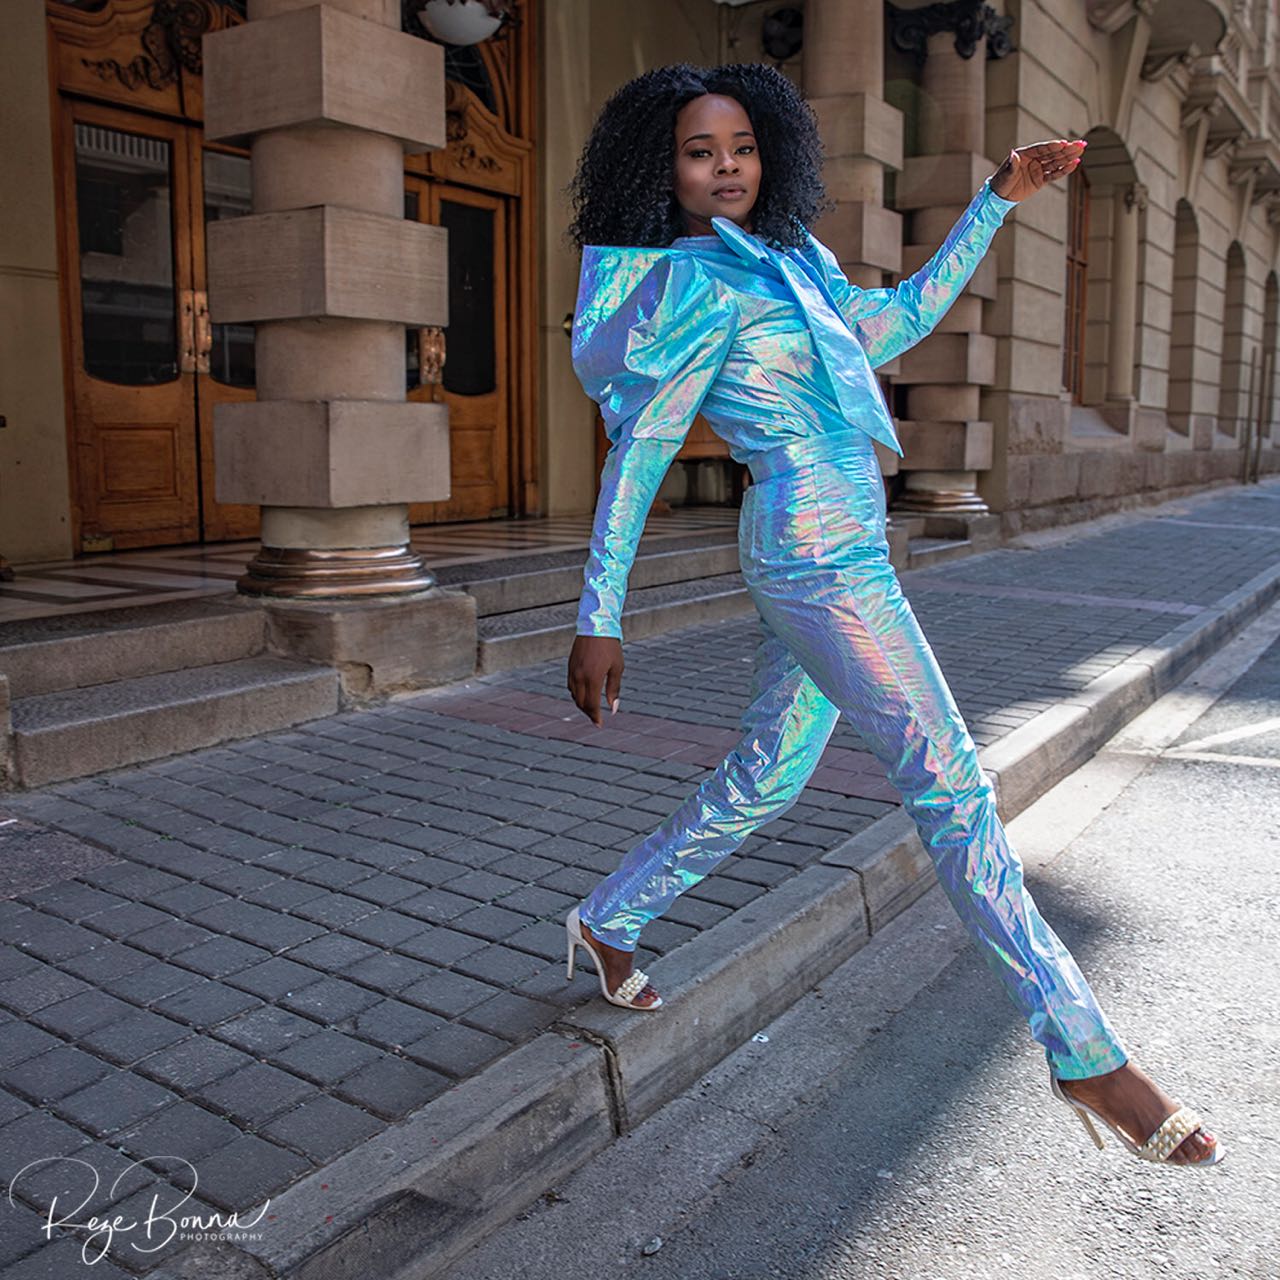 You Need To See Olajumoke Orisaguna In This Editorial With David Tlale & Reze Bonna!